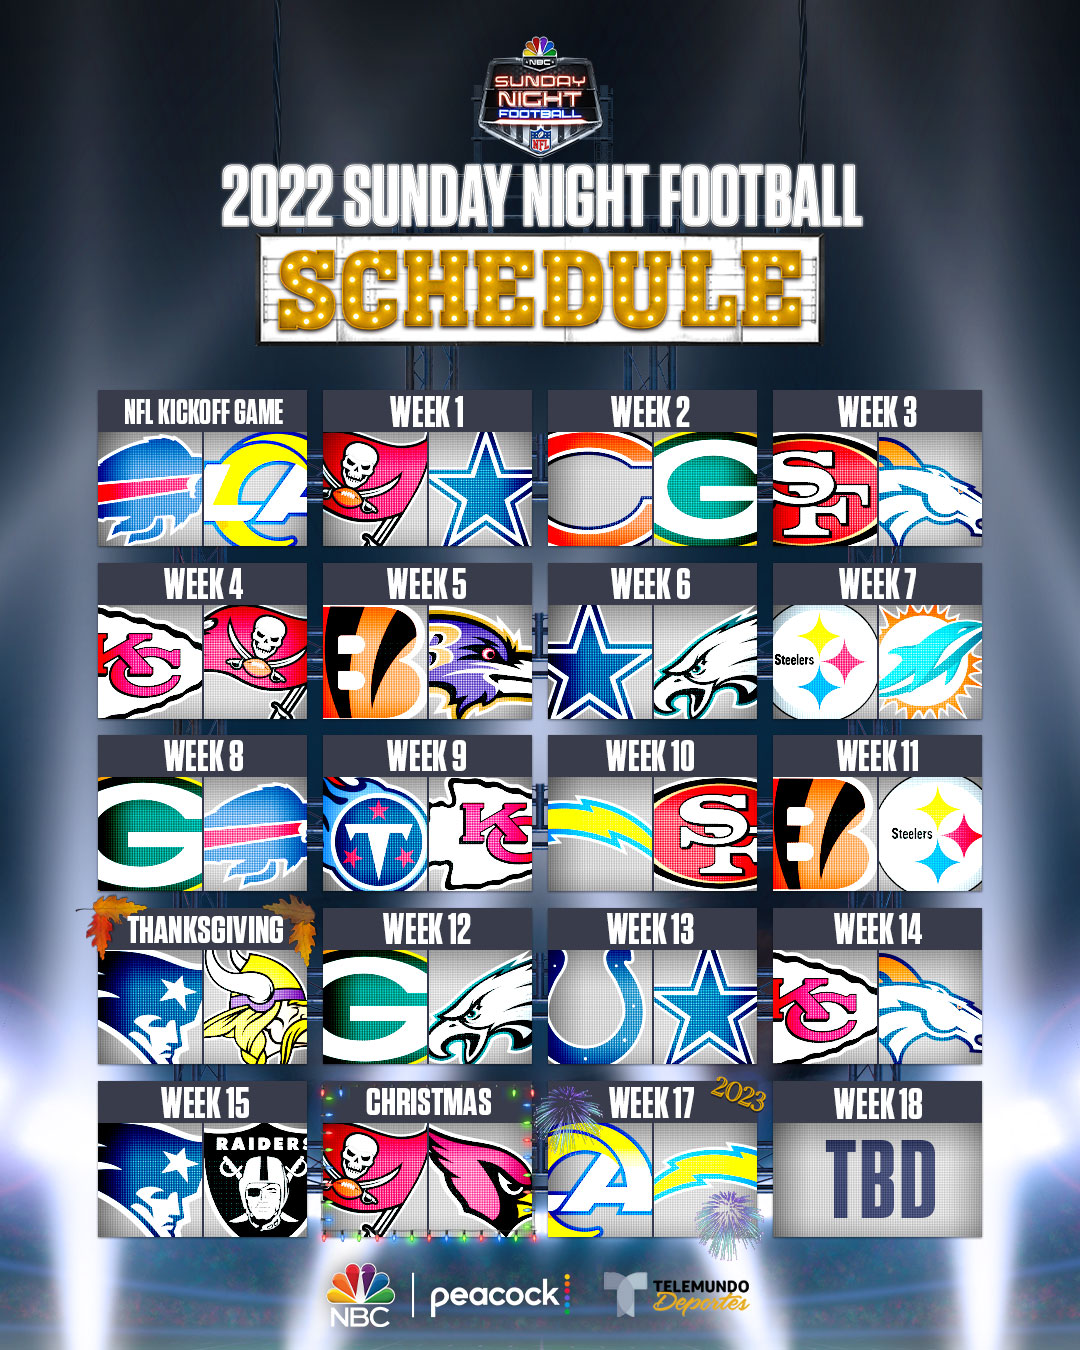 Sunday Night Football on NBC - Week 1 of the 2022 NFL season is going to be  WILD! 